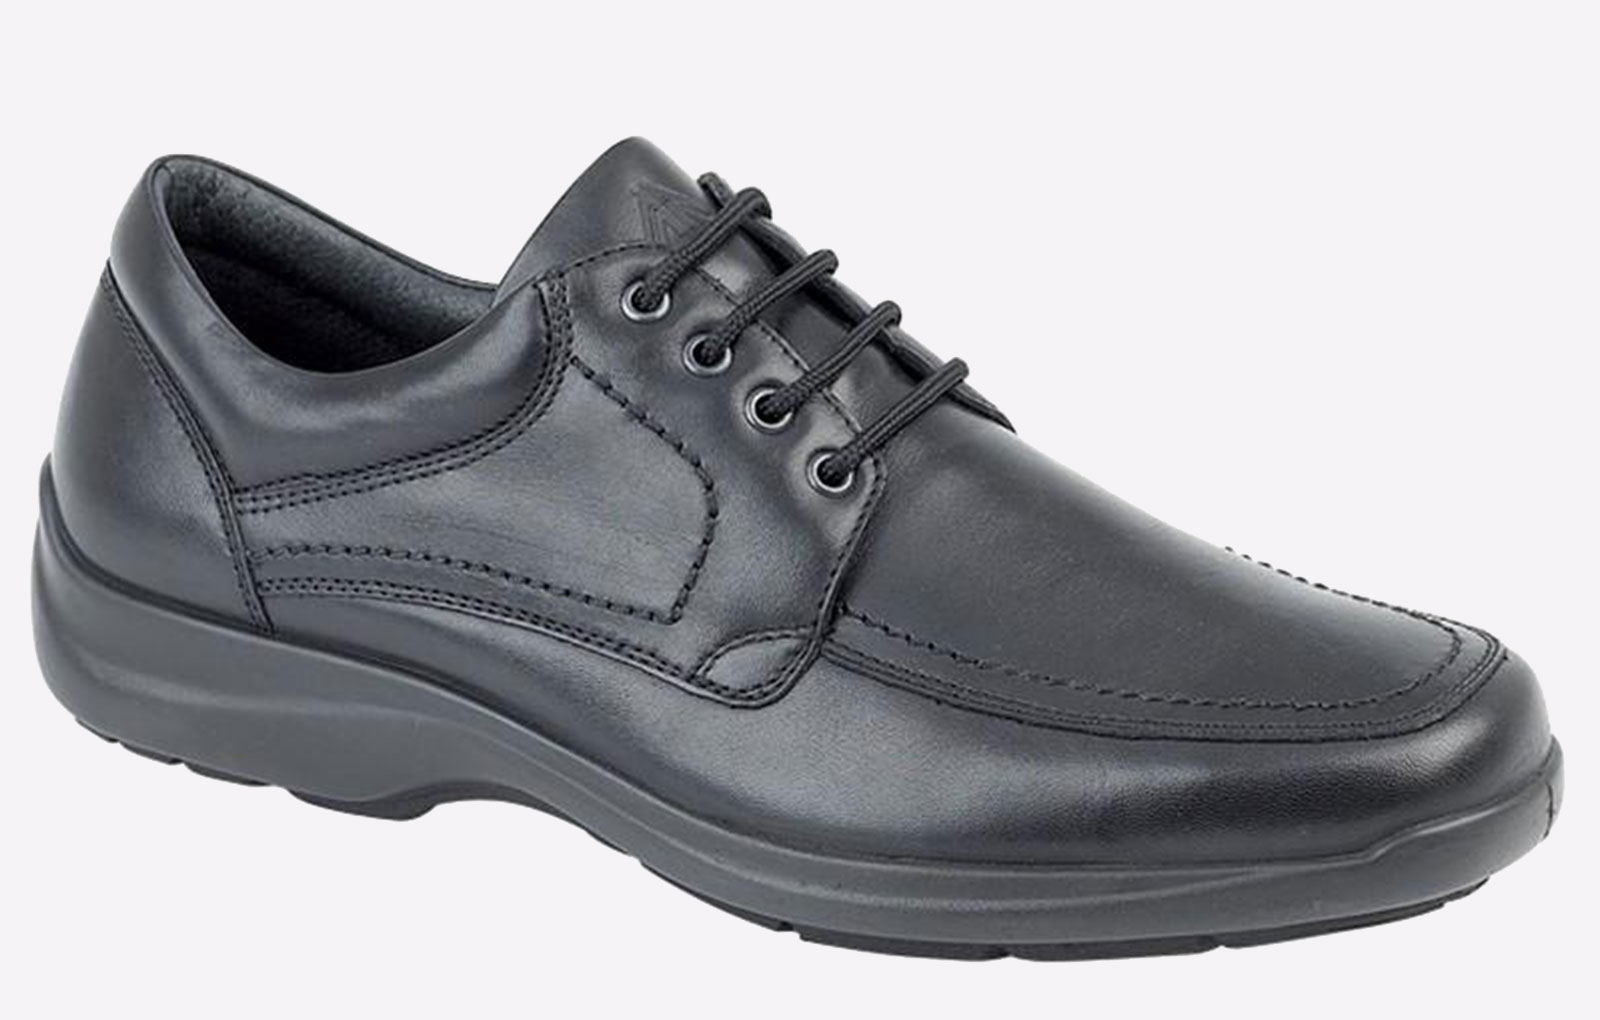 Imac Vale Leather Shoes Mens - GBD-2326